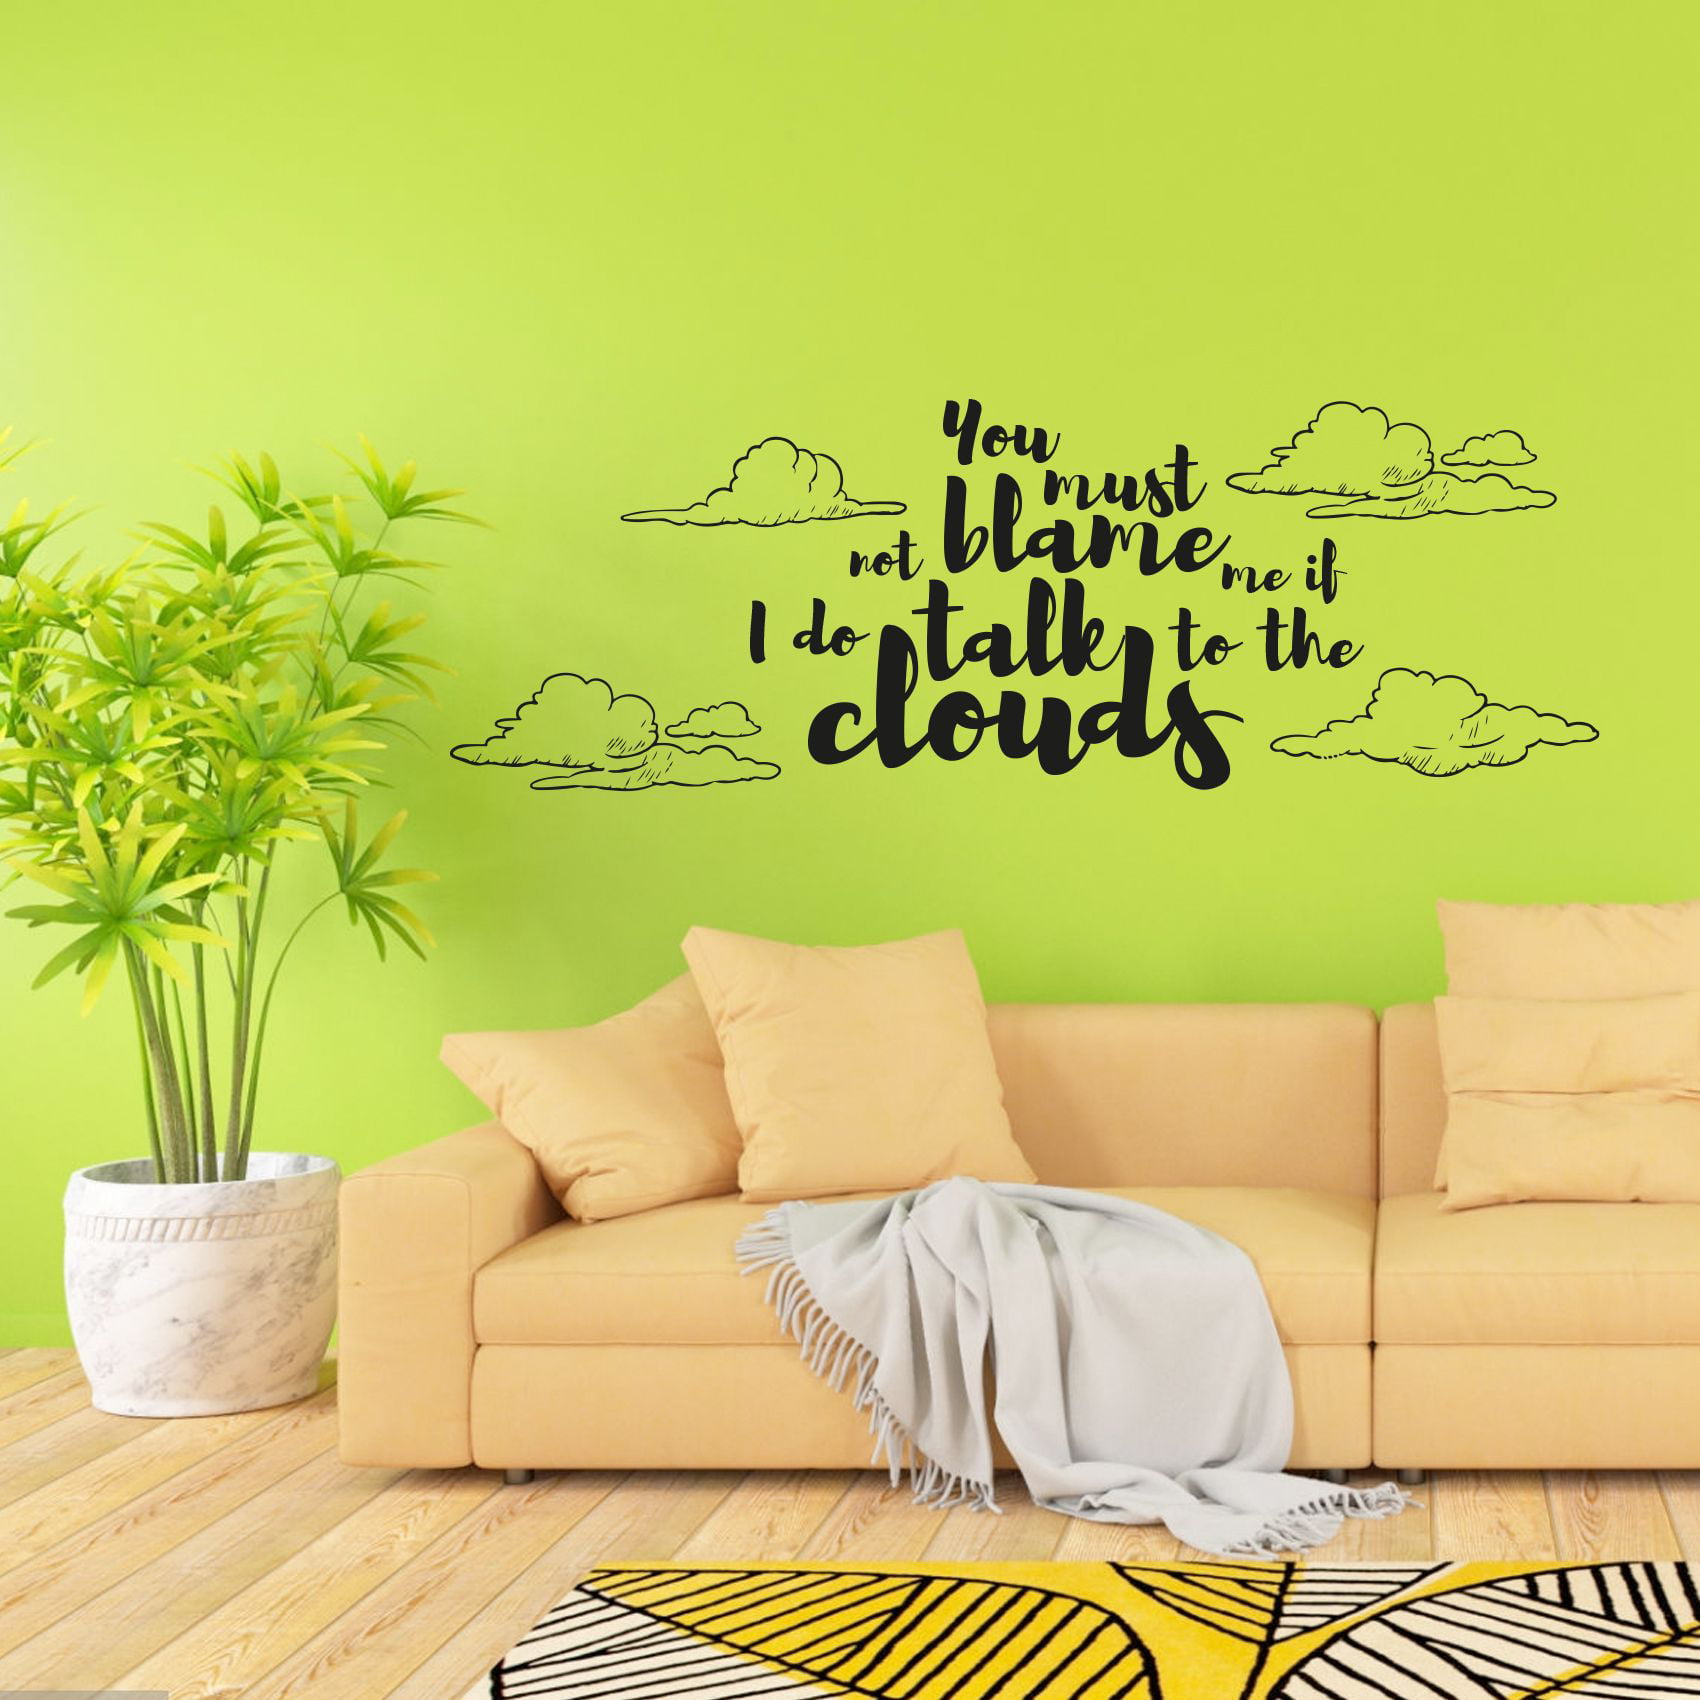 Dear Students Education Quote Wall Sticker Motivation Vinyl Wall Art Decals Home 